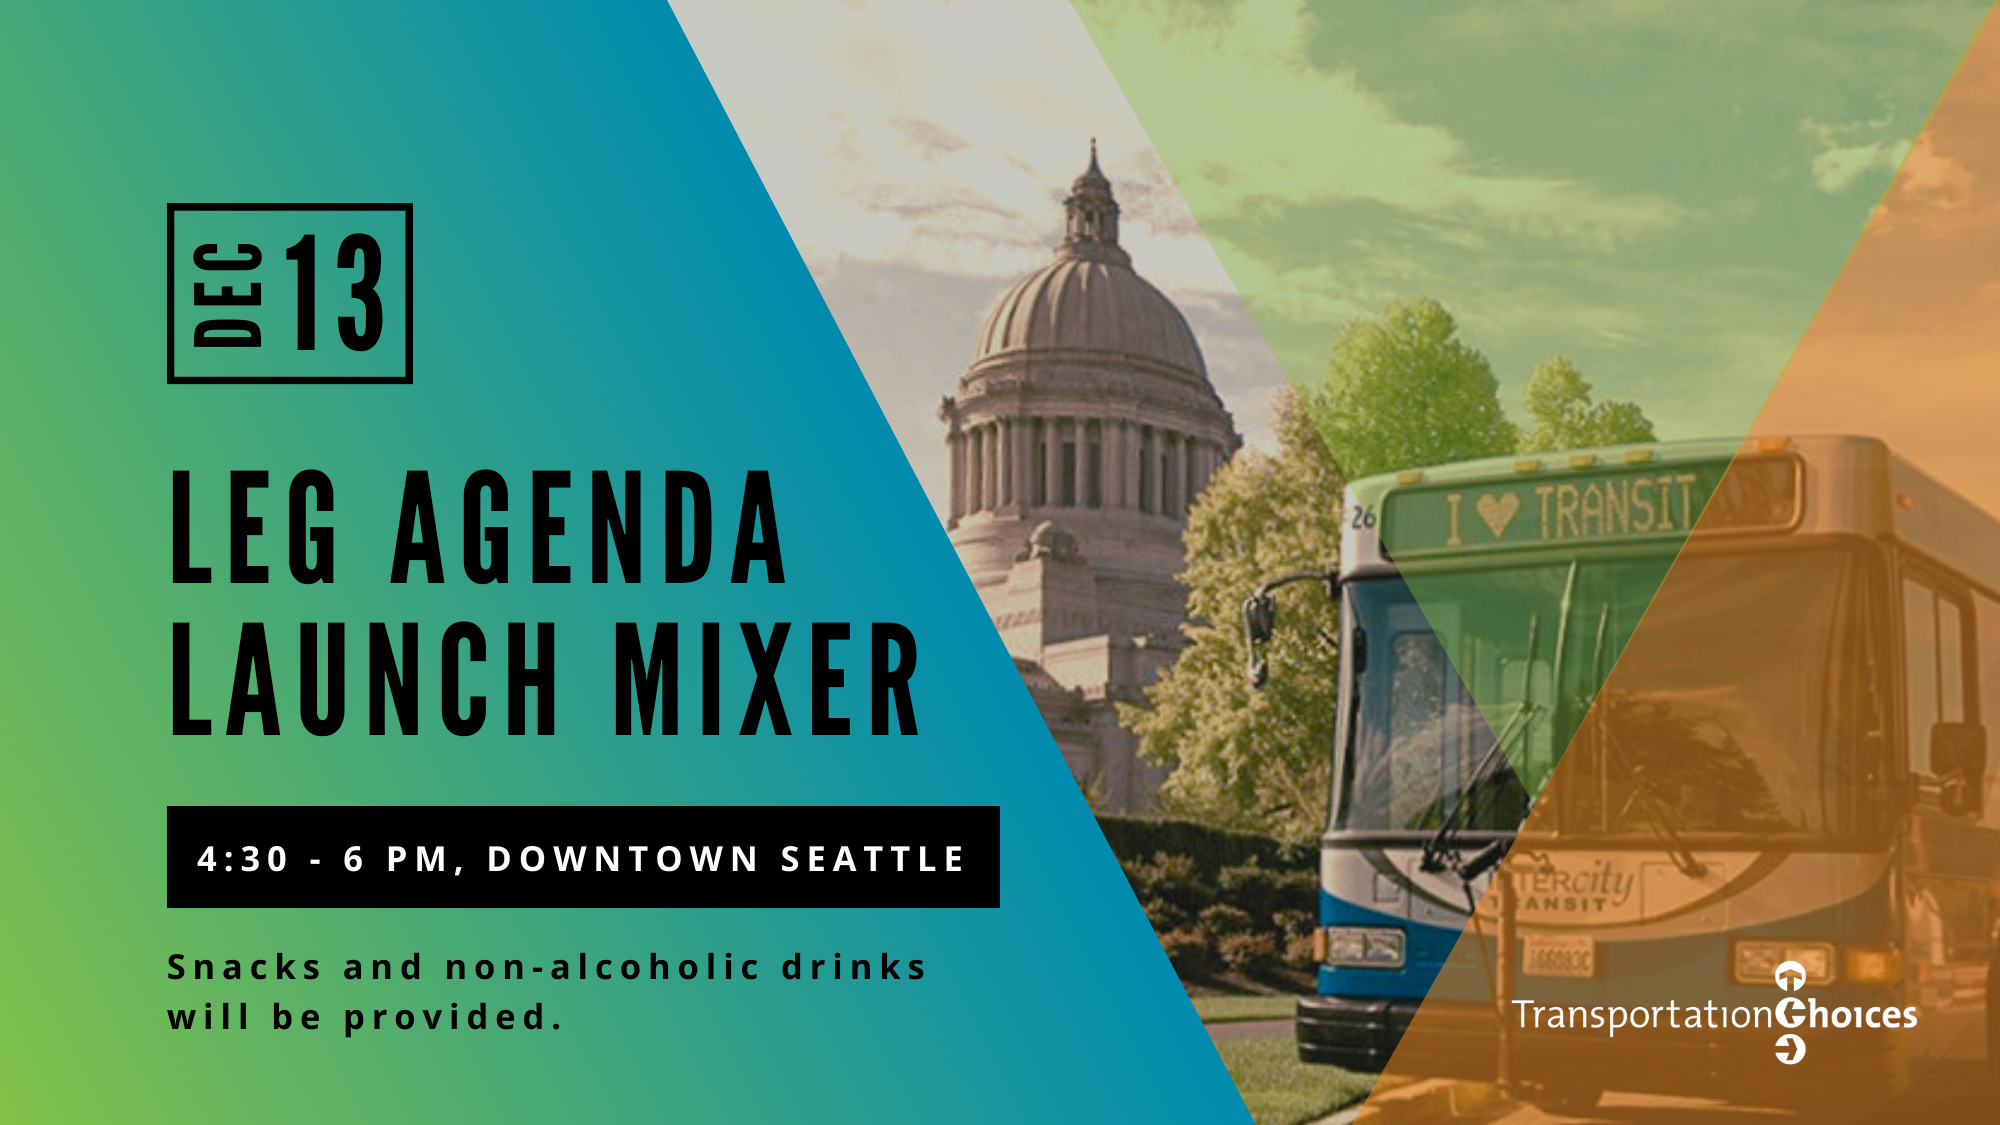 Bckground image of a bus in front of the Washington State Capitol building. Foreground shows event name, "Leg Agenda Launch Mixer"